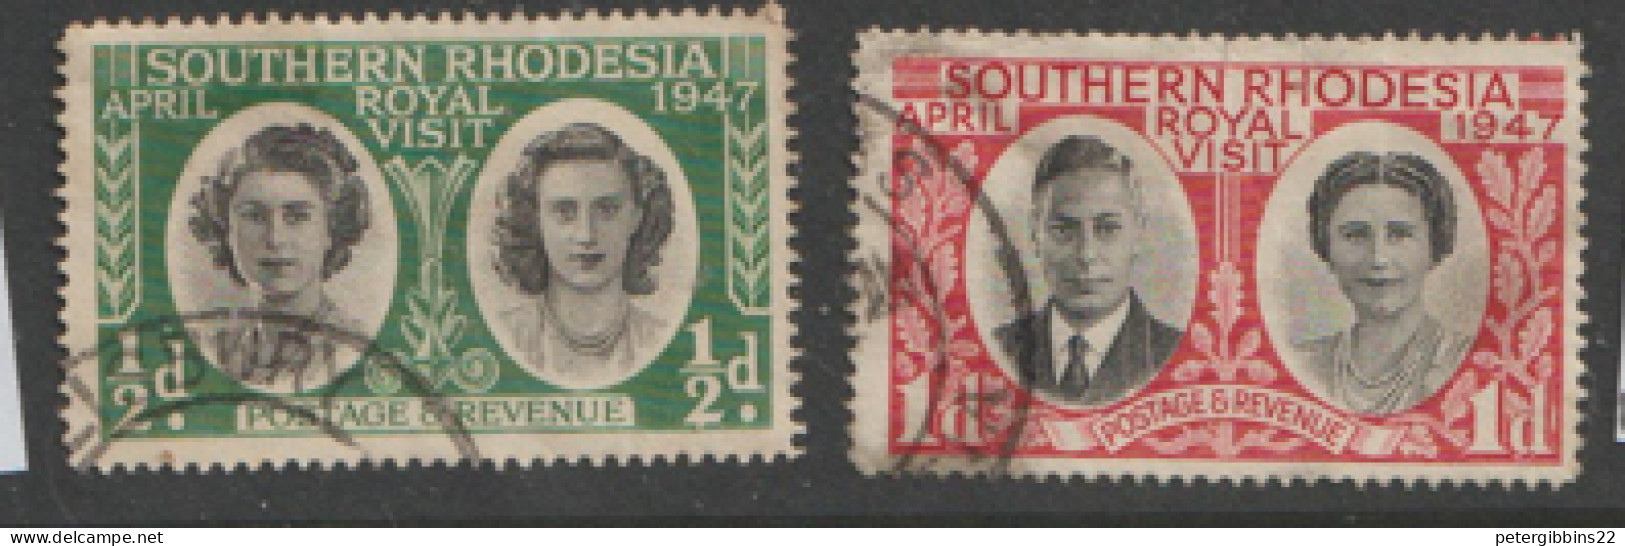 Southern  Rhodesia  1947  SG 62-3  Royal  Visit Fine Used - Southern Rhodesia (...-1964)